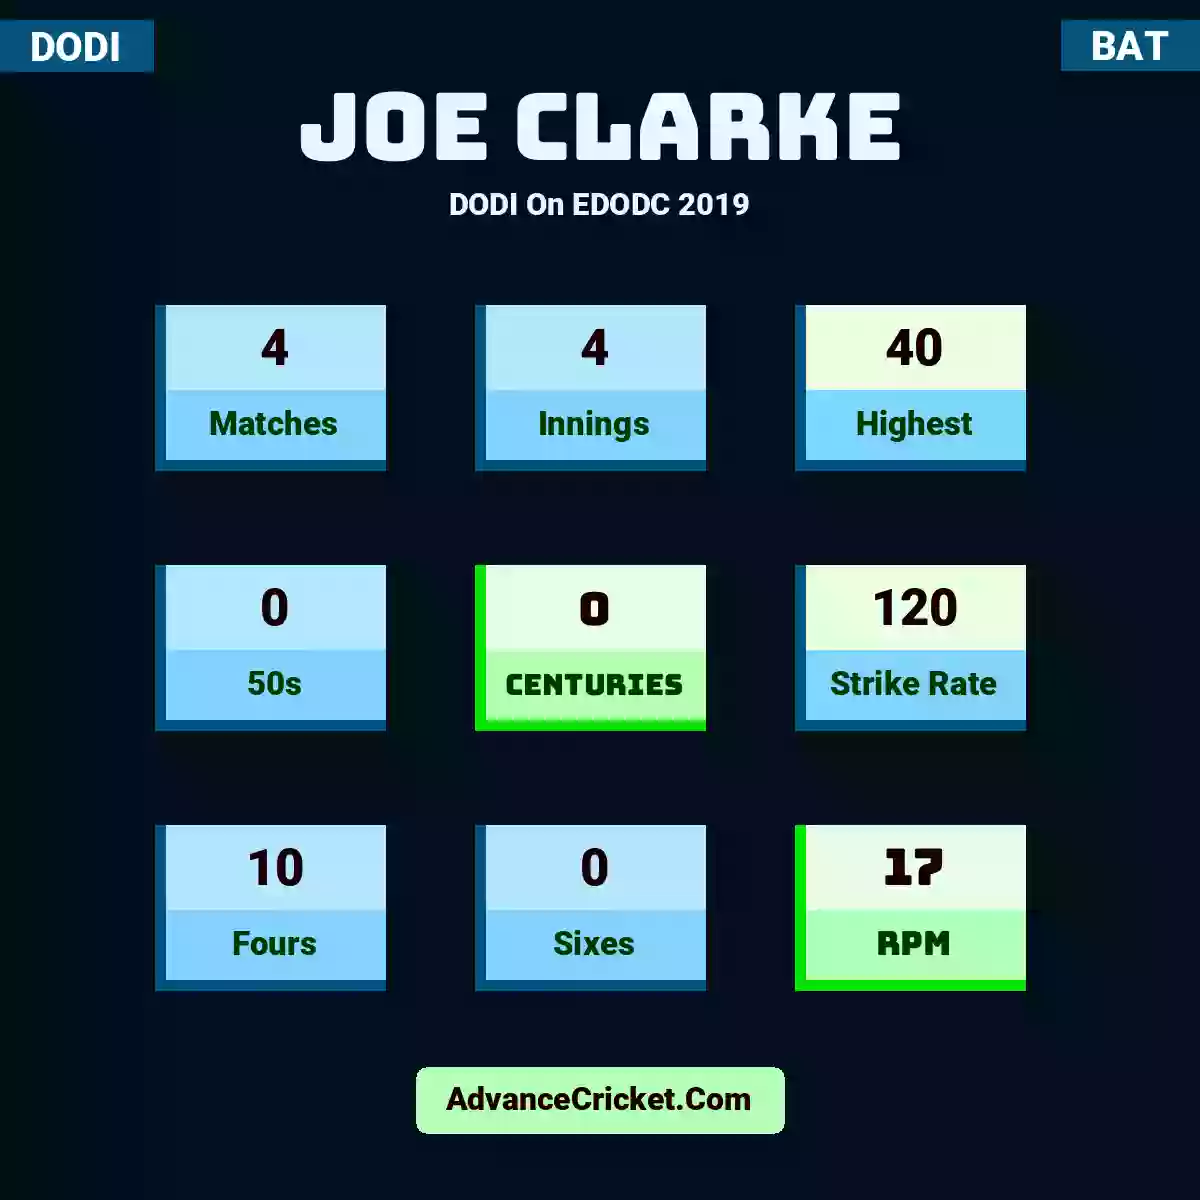 Joe Clarke DODI  On EDODC 2019, Joe Clarke played 4 matches, scored 40 runs as highest, 0 half-centuries, and 0 centuries, with a strike rate of 120. J.Clarke hit 10 fours and 0 sixes, with an RPM of 17.